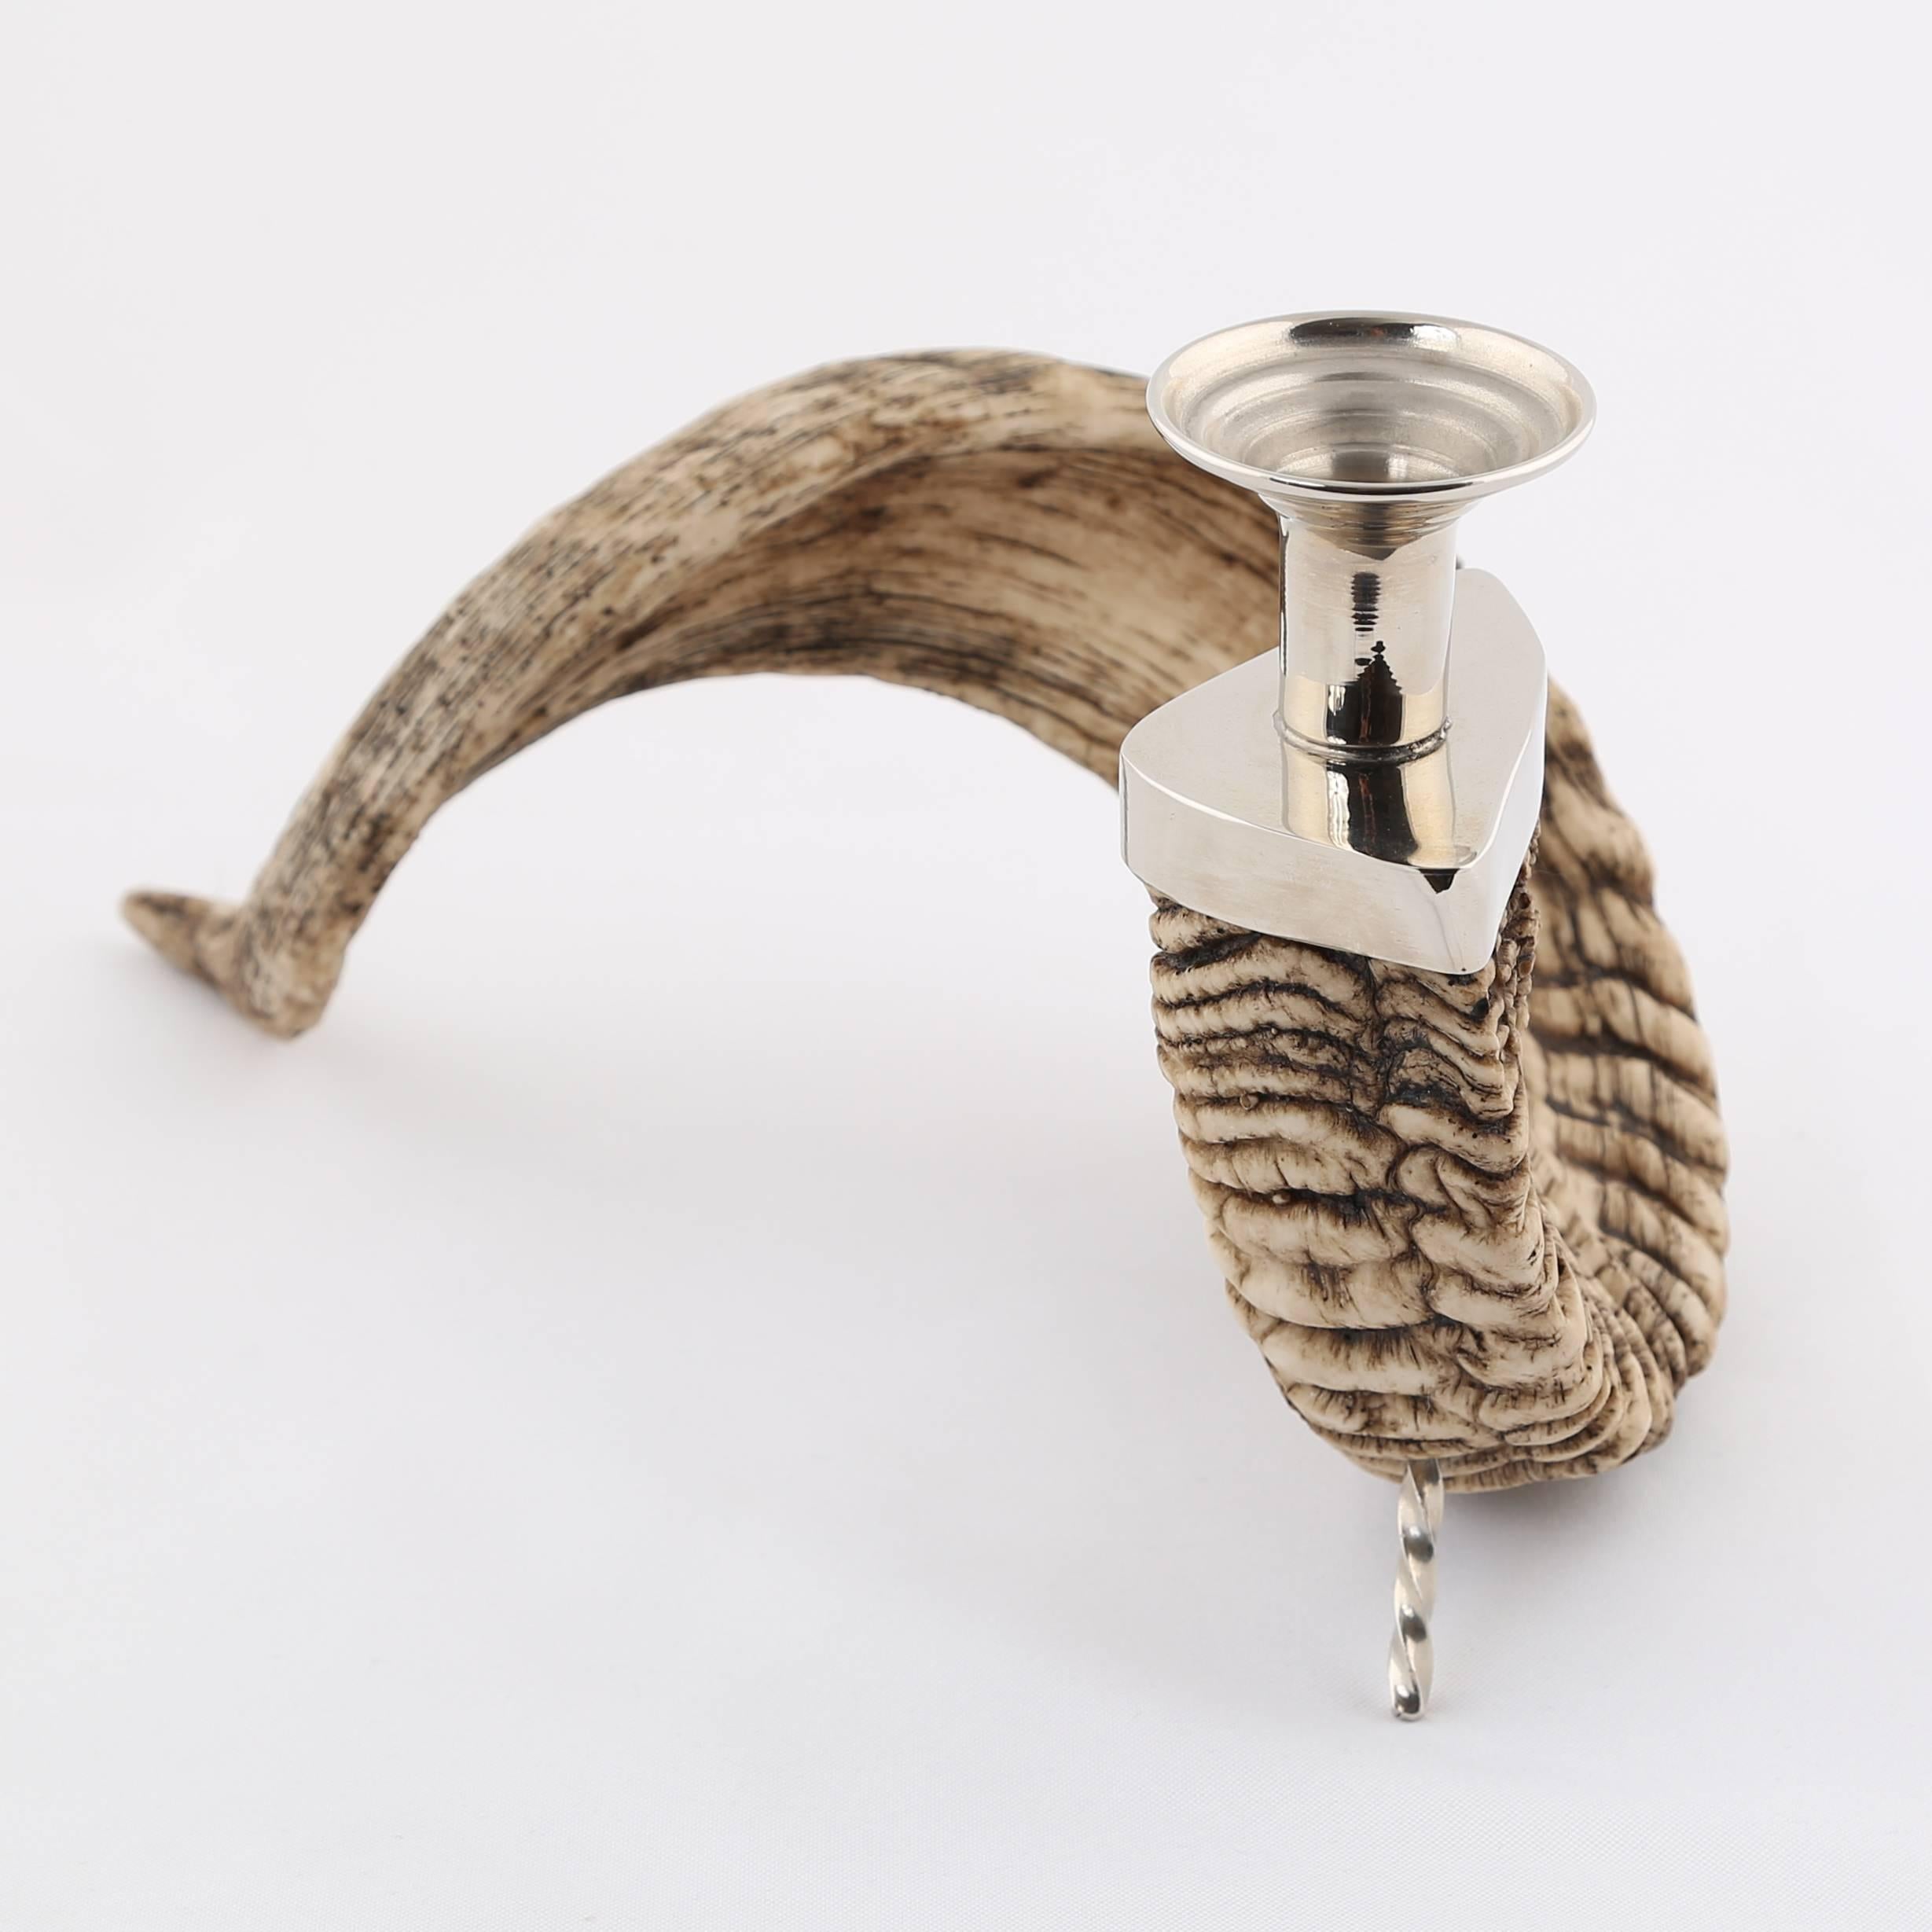 Ram's Horn Candle Holder with Nickel Fittings, circa 1970s In Good Condition For Sale In Brooklyn, NY